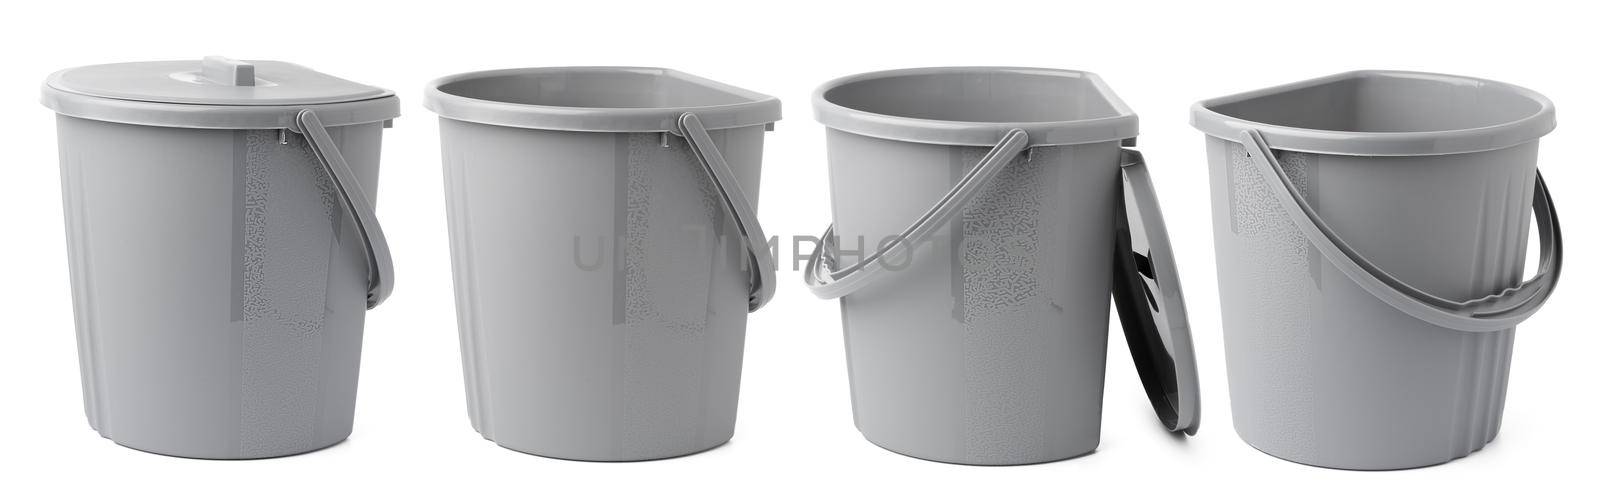 Plastic bucket with handle isolated on white background by Fabrikasimf